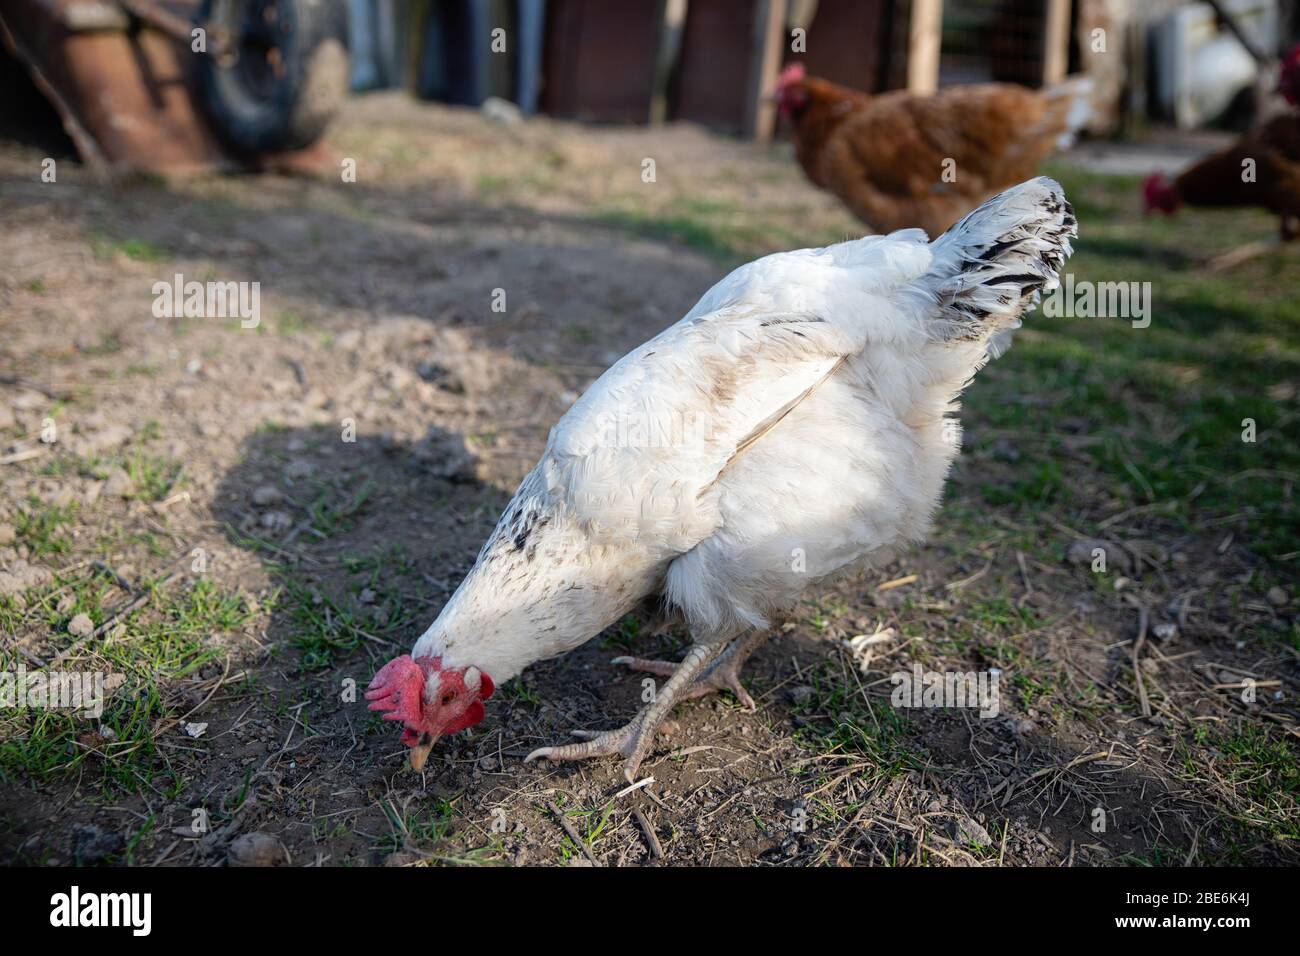 Two hen chicken walking outdoors on the countryyard in farm village searching for food Stock Photo